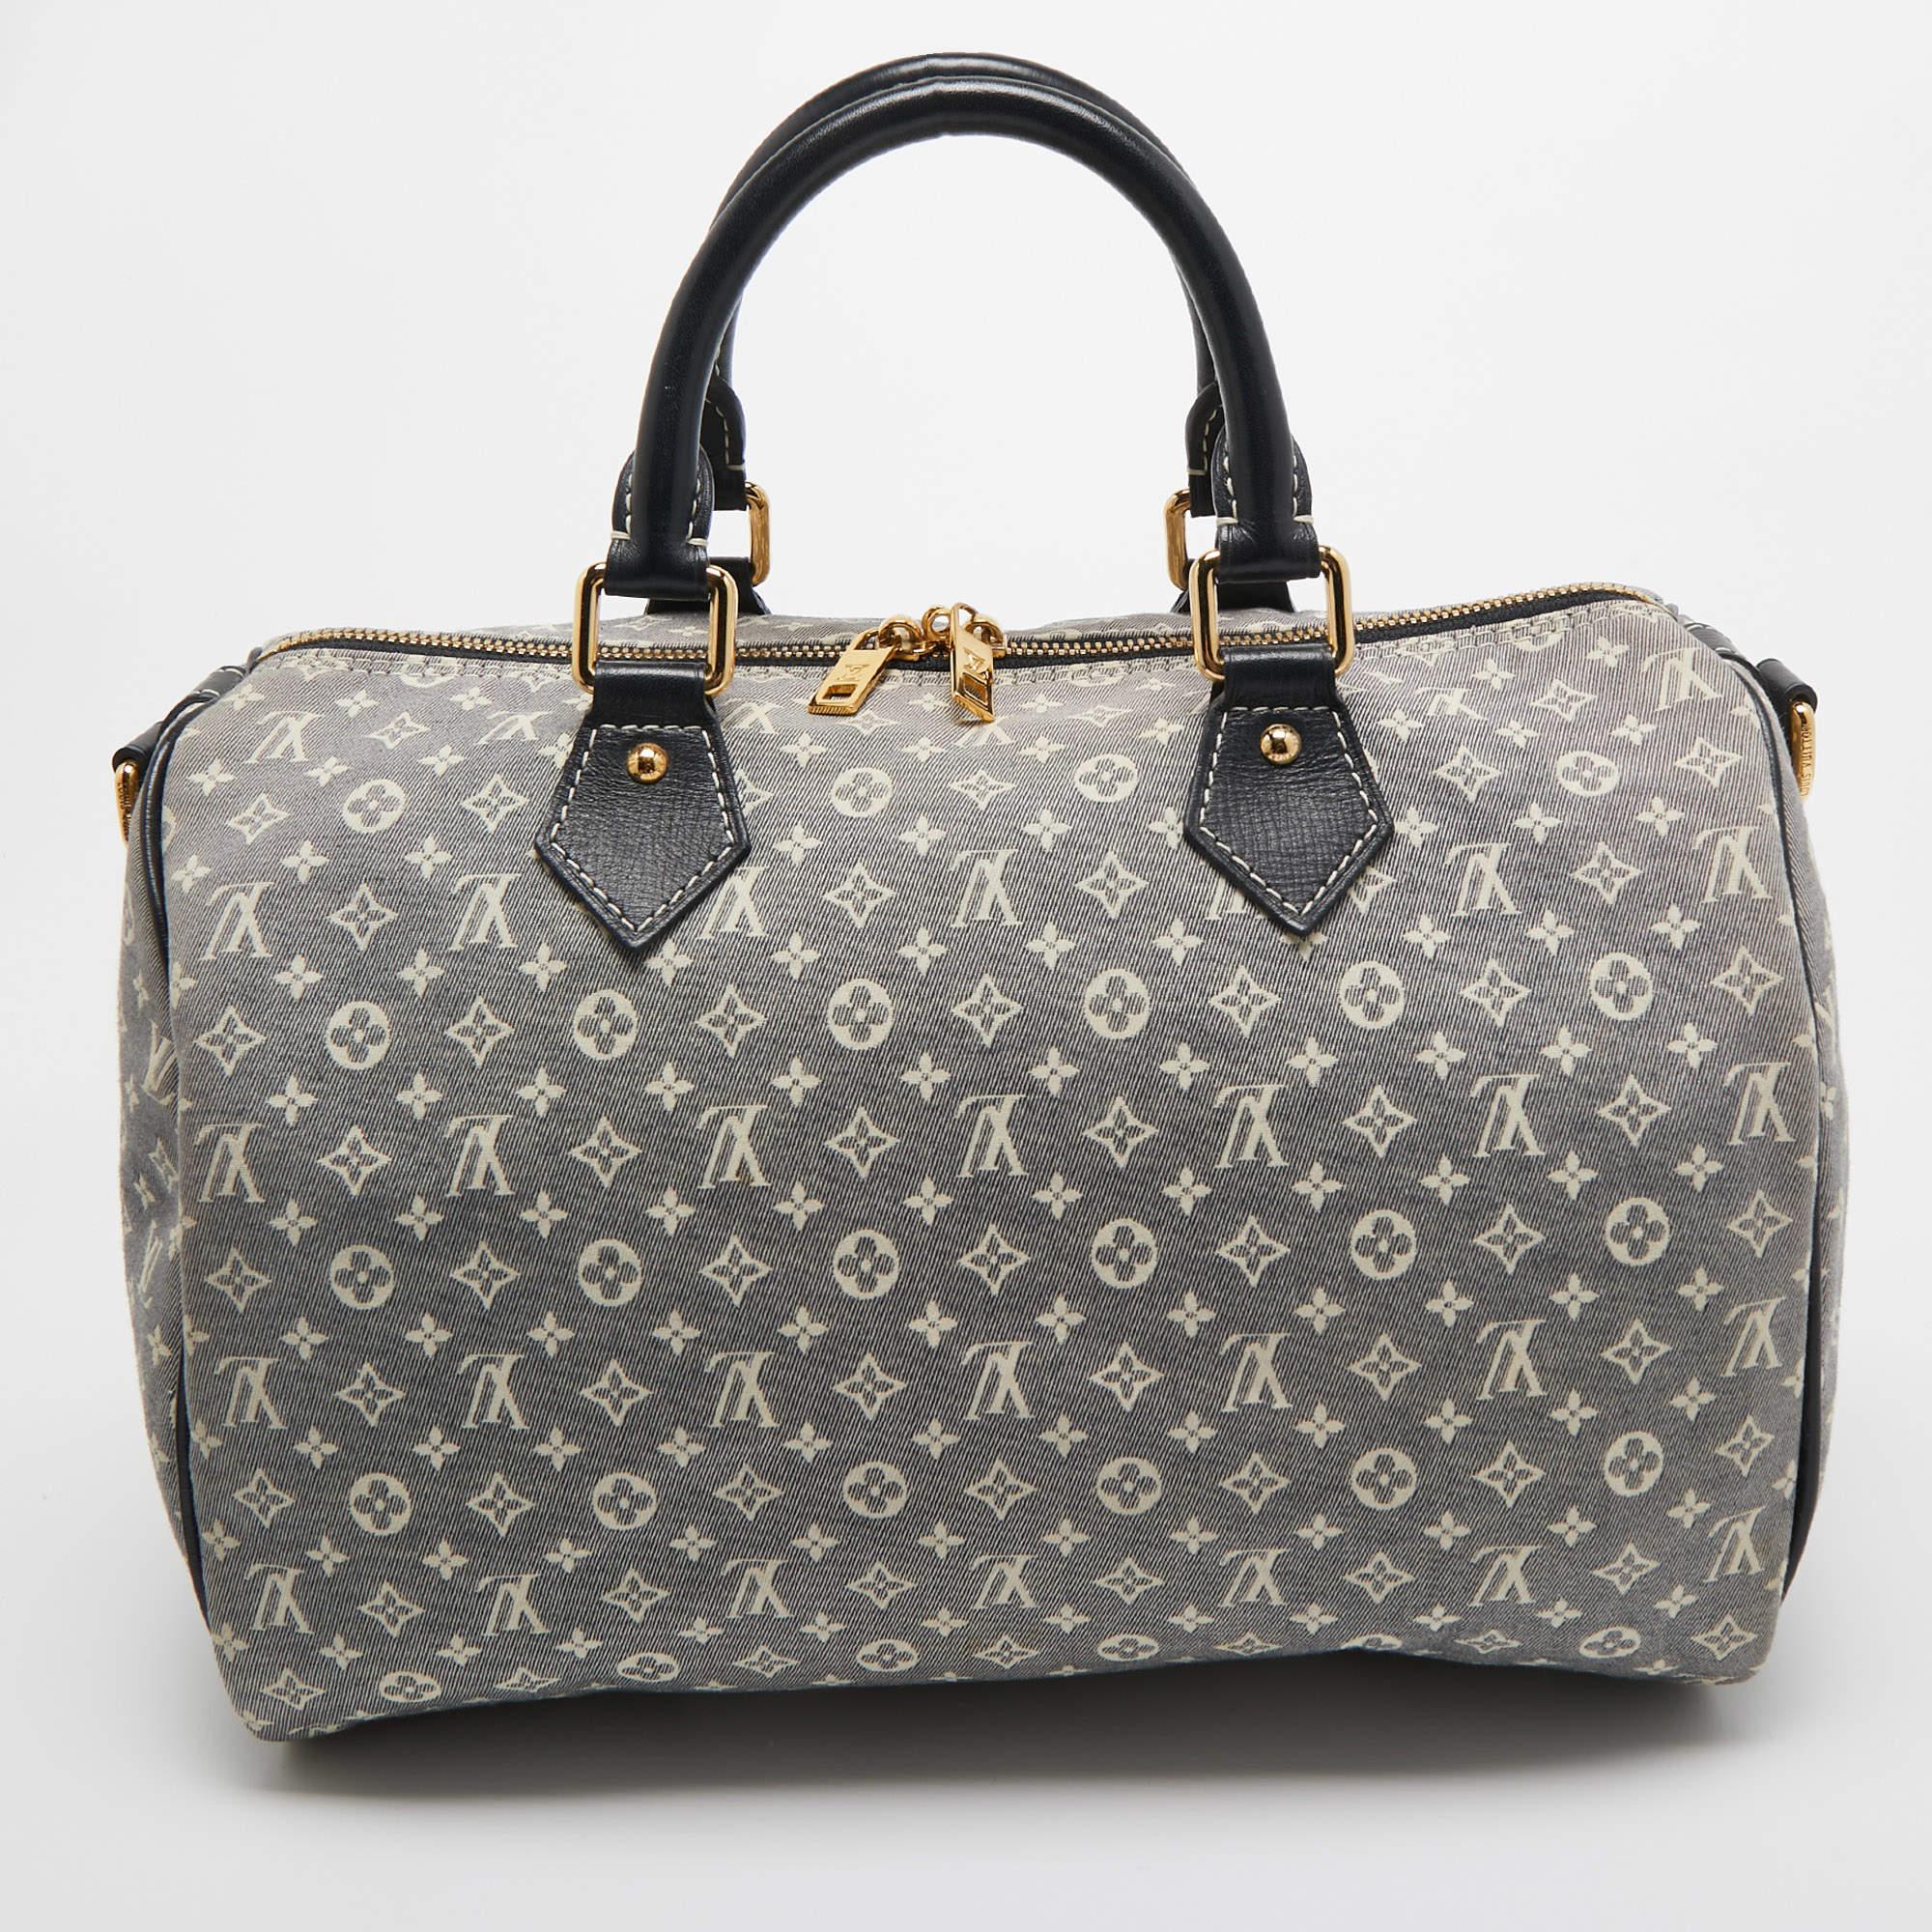 The simple silhouette and the use of durable materials for the exterior bring out the appeal of this LV Speedy 30 bag for women. It features comfortable handles and a well-lined interior.

Includes: Detachable Strap